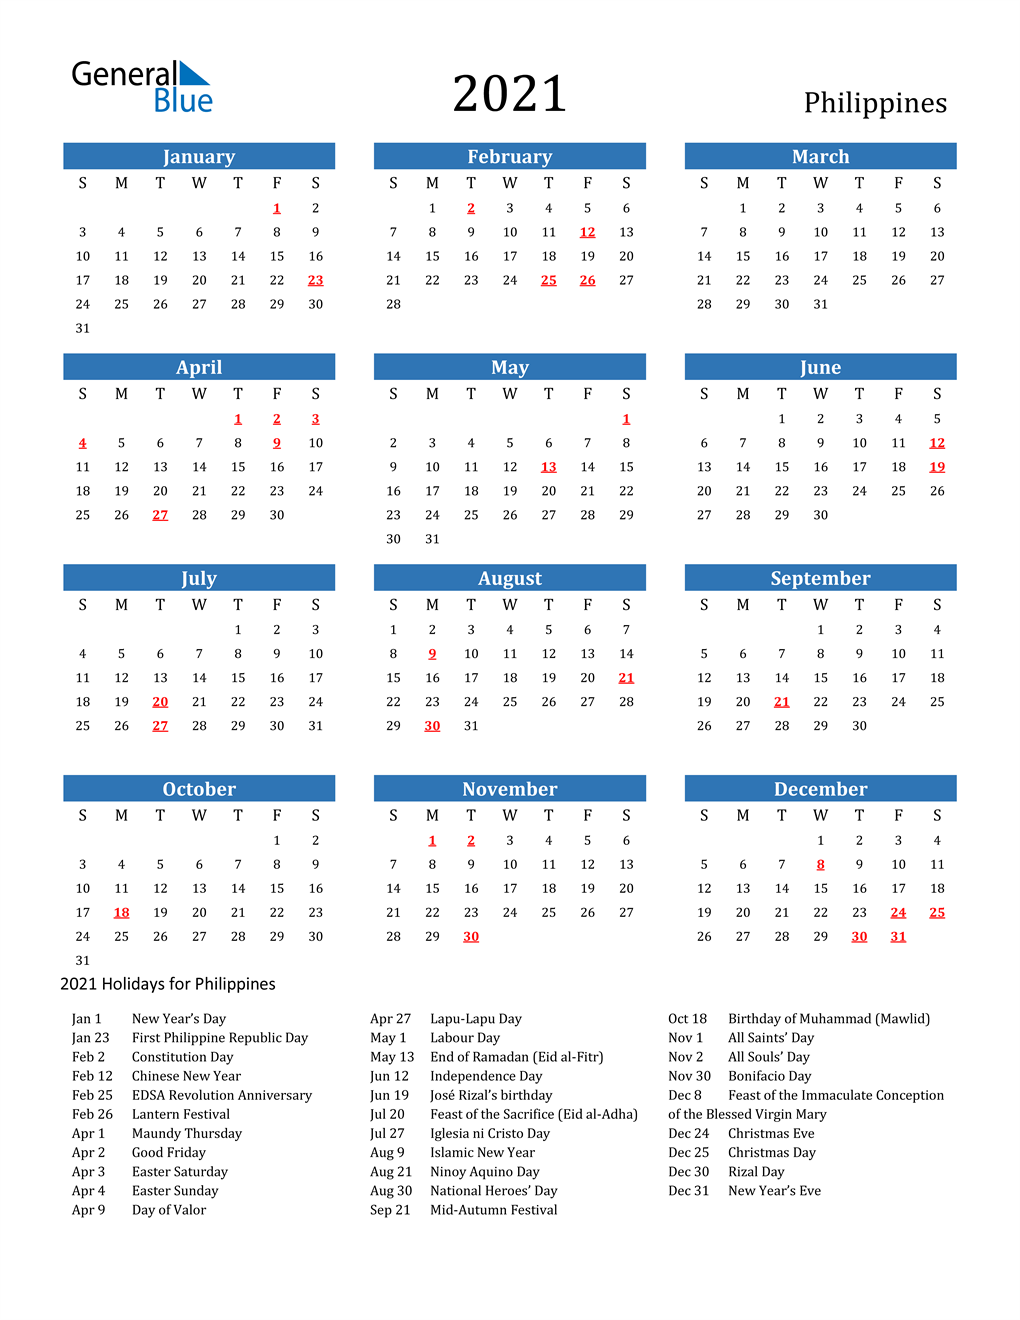 2021 Philippines Calendar With Holidays